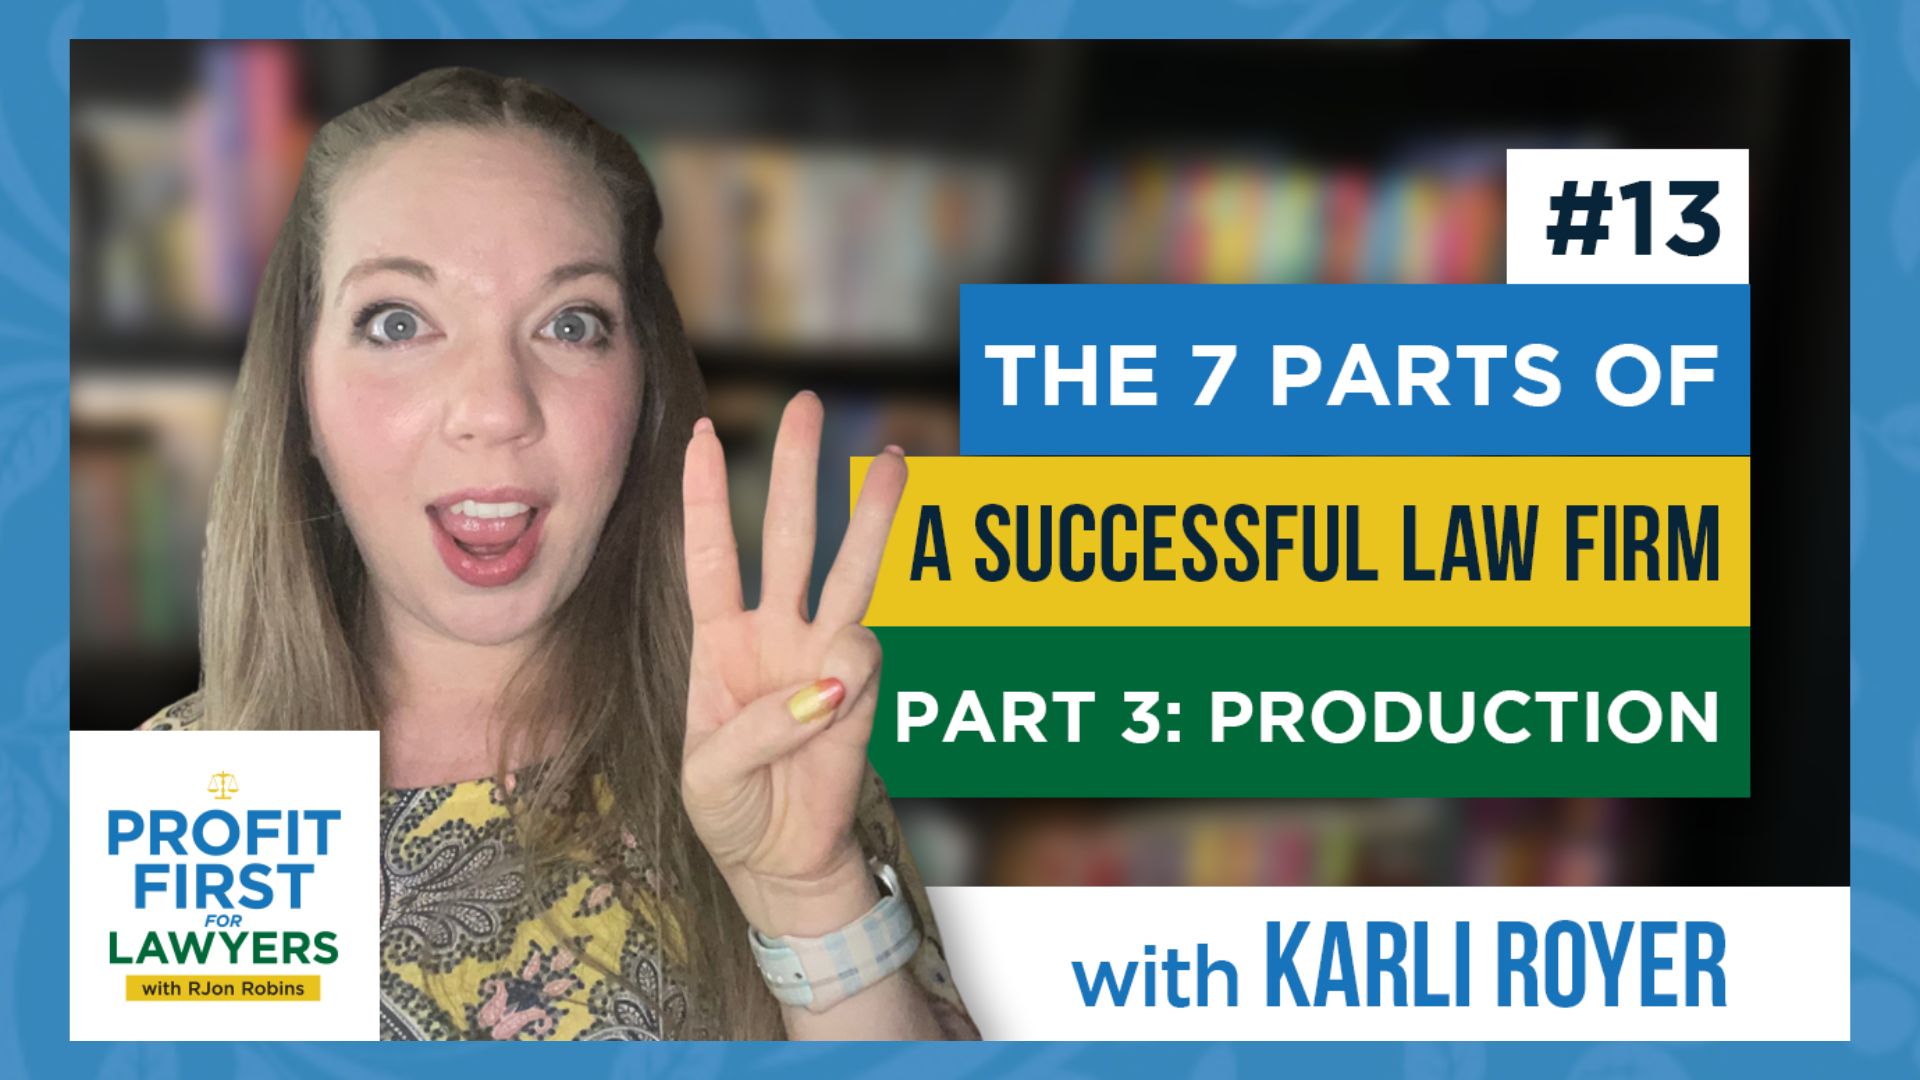 Profit First For Lawyers featured image for episode 15 shows Karli Royer holding up four fingers and smiling. Title of episode: The 7 Parts of A Successful Law Firm Part 4: People